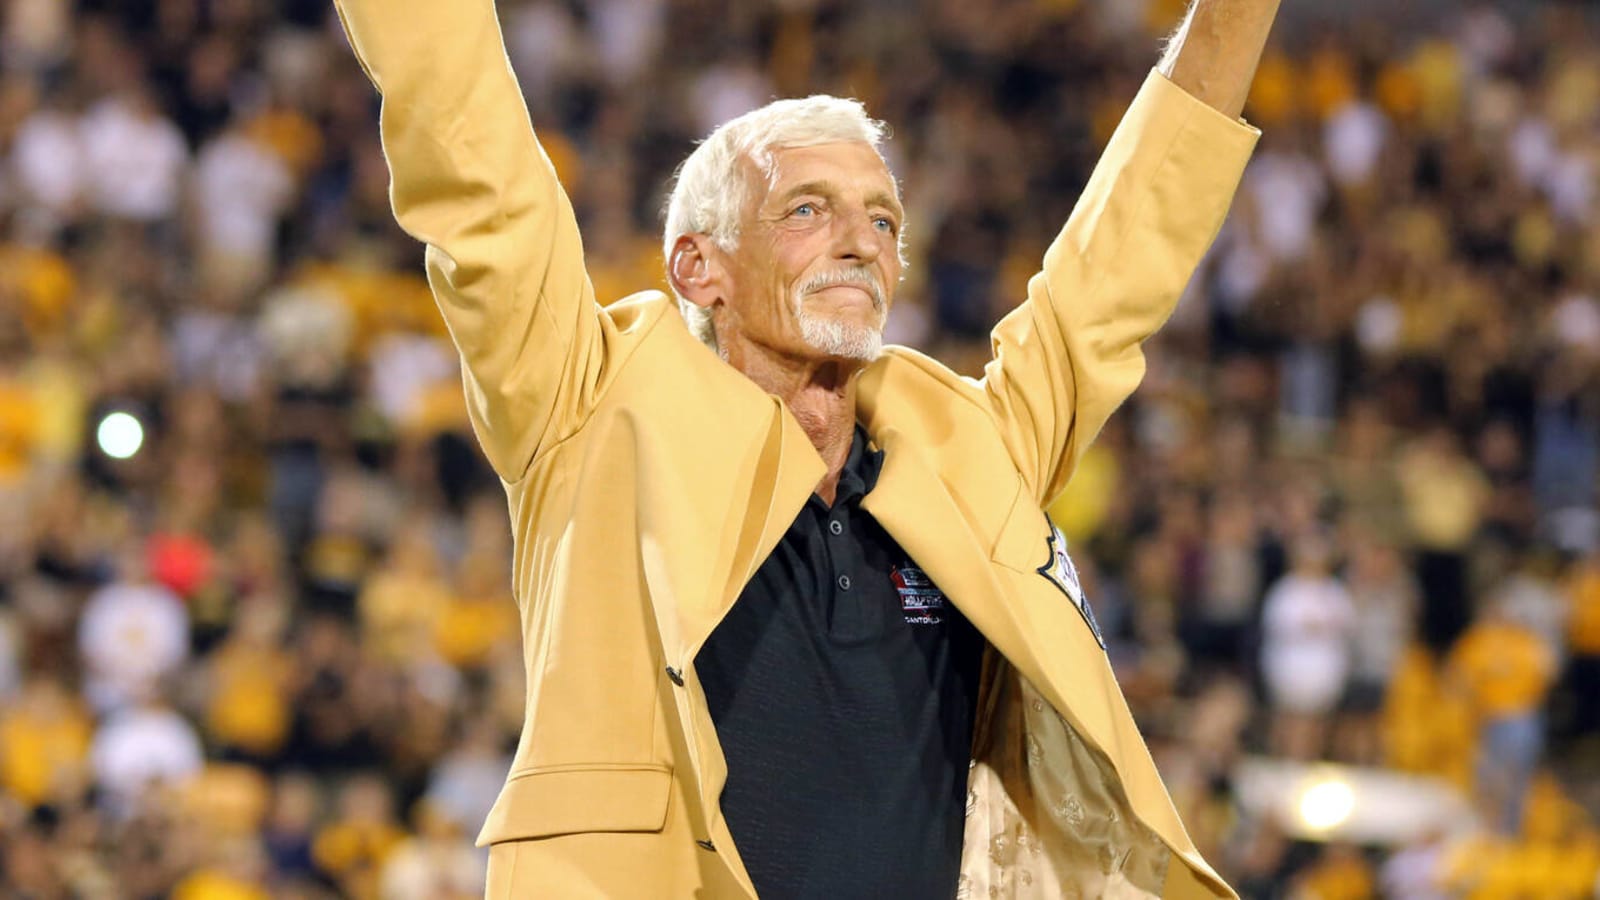 Full of hot air? Brilliance of Ray Guy left opponents perplexed